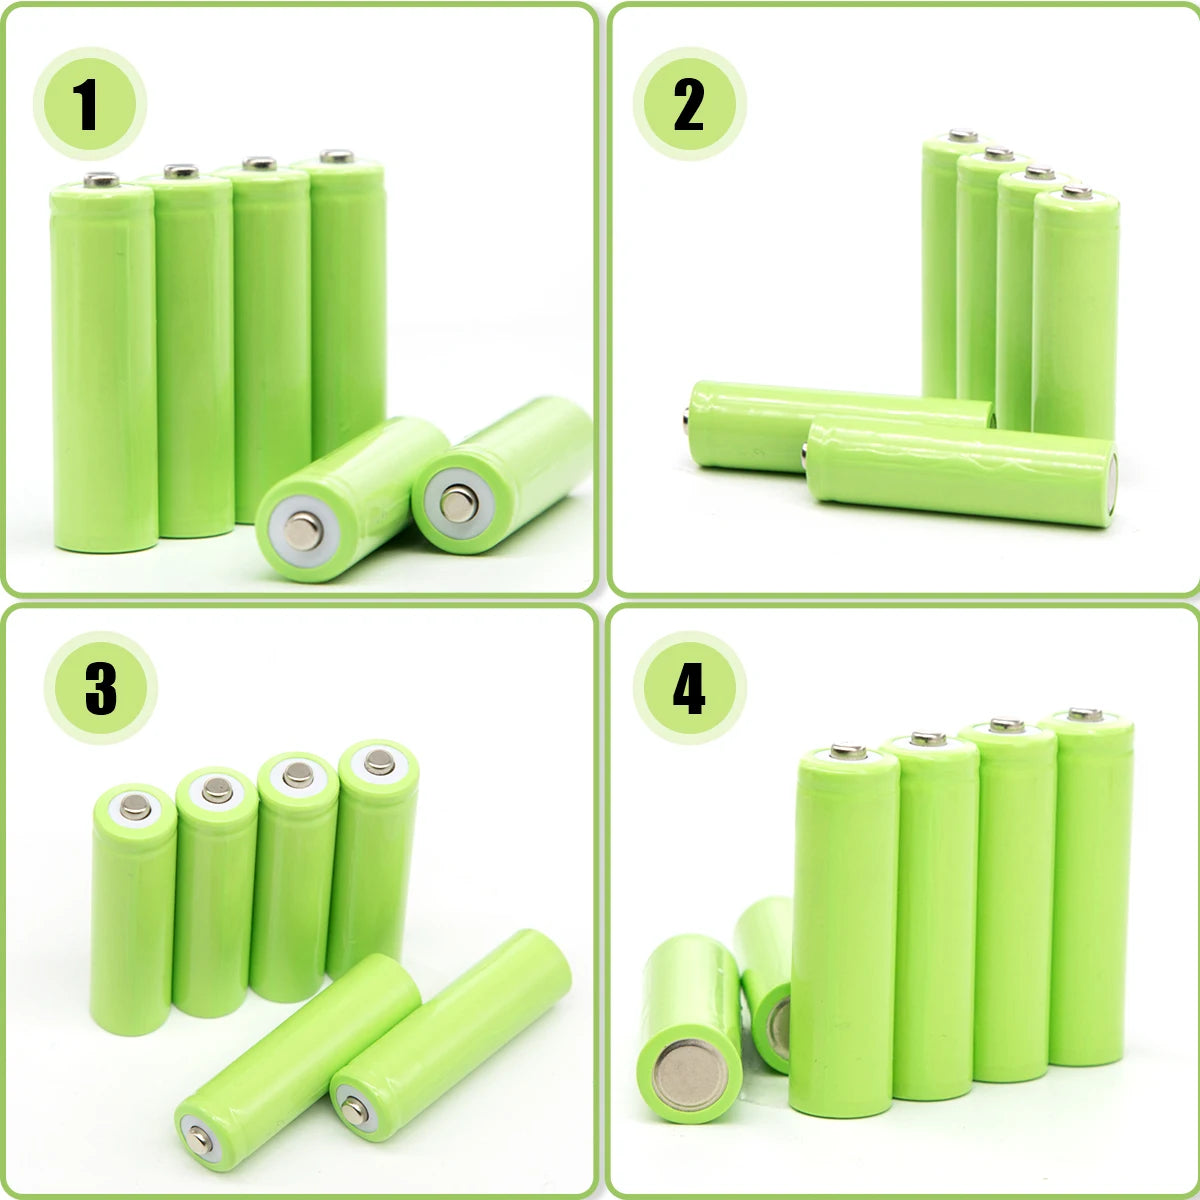 4-8PCS 1200mAh 1.5V AA Ni-Mh Recharge Battery Constant High Efficiency Output 1200 Cycles For Mouse Microphone Alkaline Battery